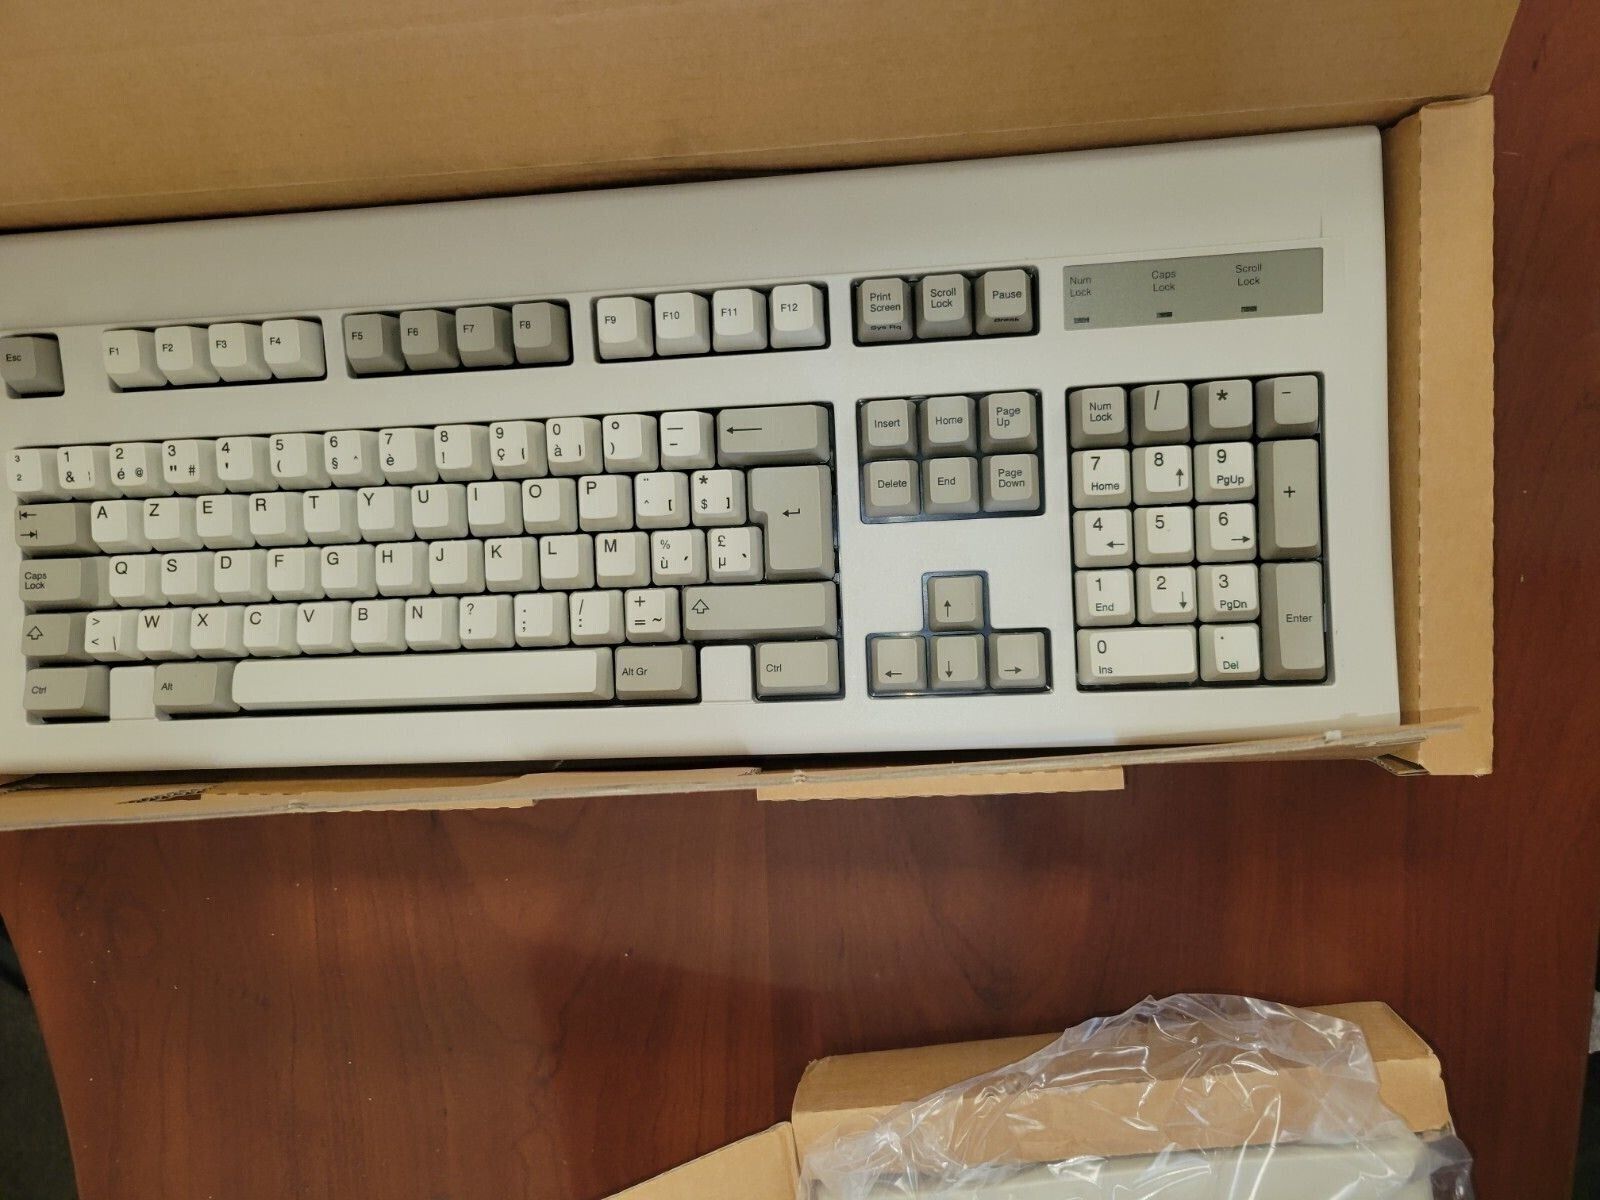 ALPS  Mechanical Keyboard CL 18802 OR CL18802 NIB  FAMILY NUMBER AT.101-102 FY88